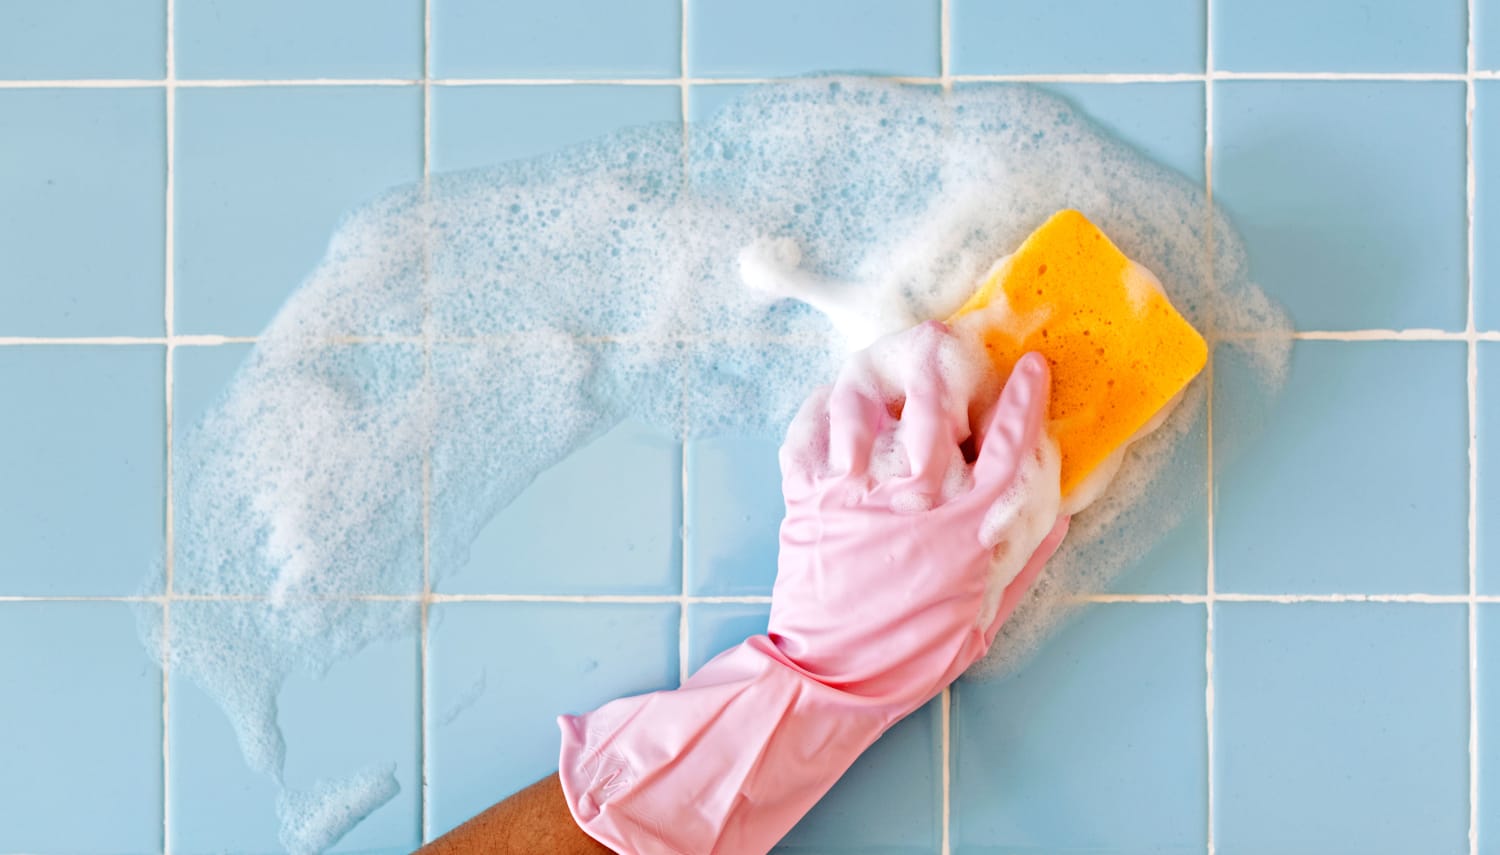 Bathroom Cleaning Checklist: Daily, Weekly, Monthly and Seasonal Schedule